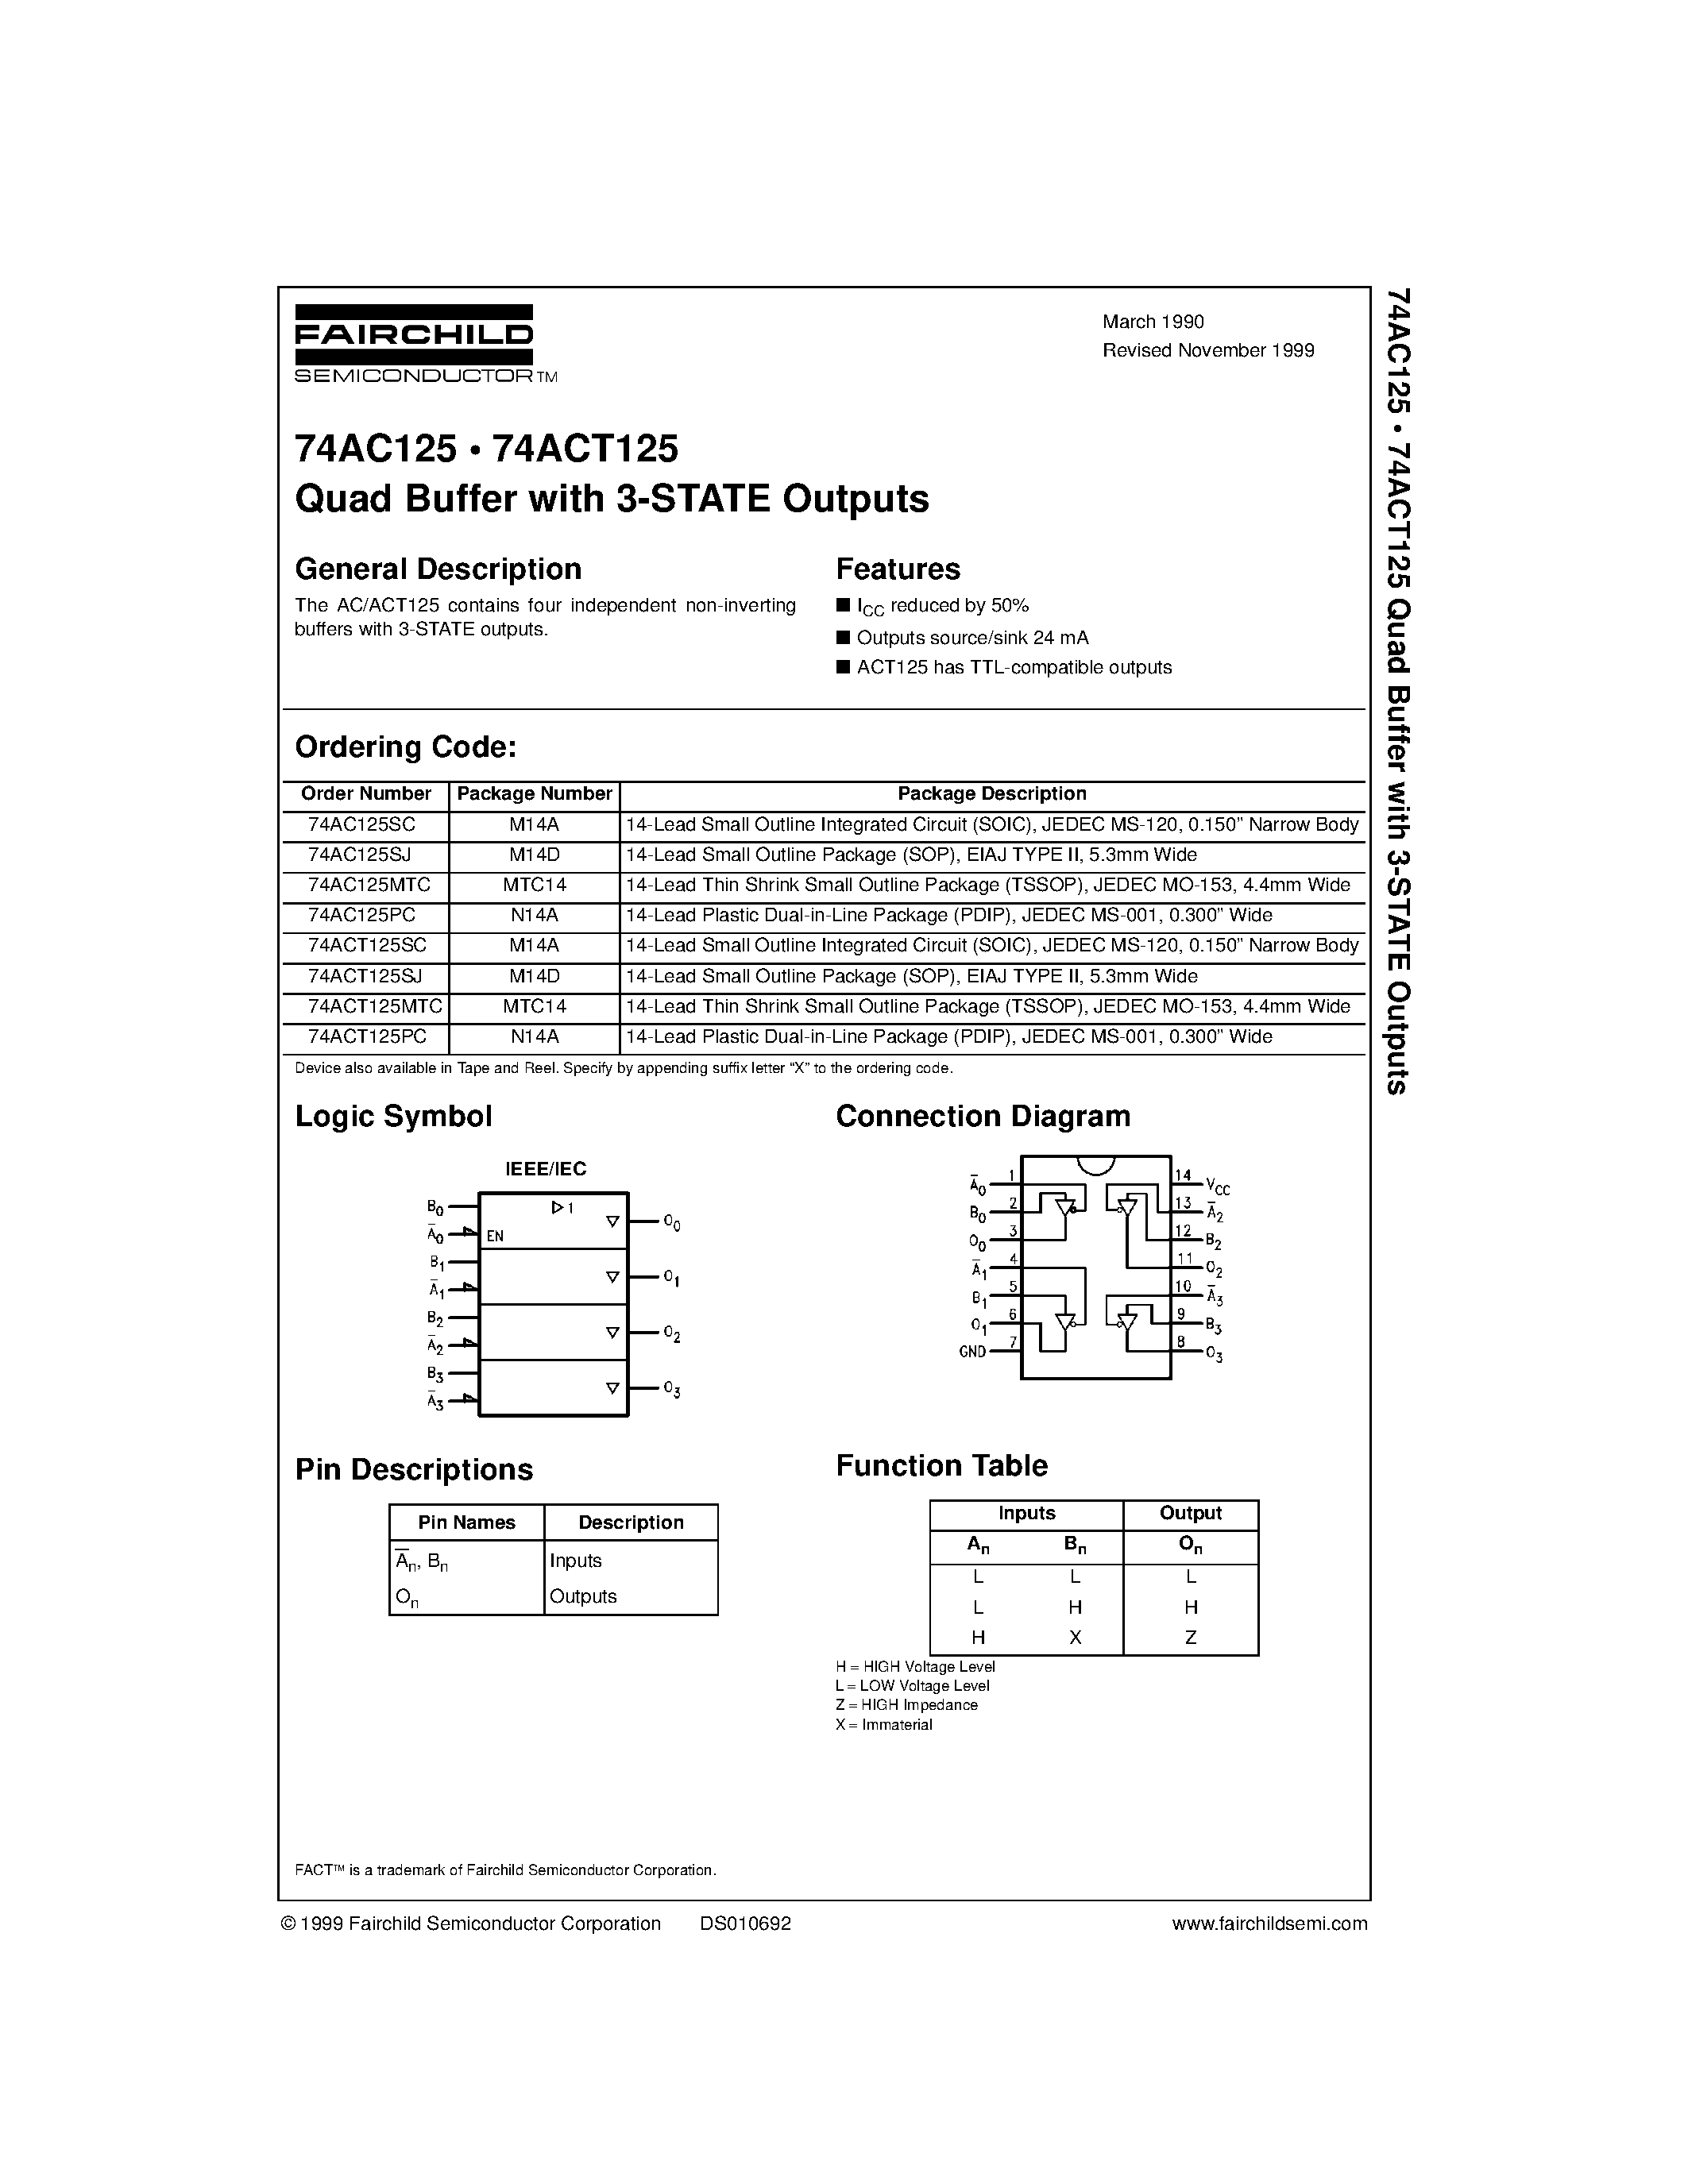 Datasheet 74AC125 - QUAD BUFFER WITH 3-STATE OUTPUTS page 1